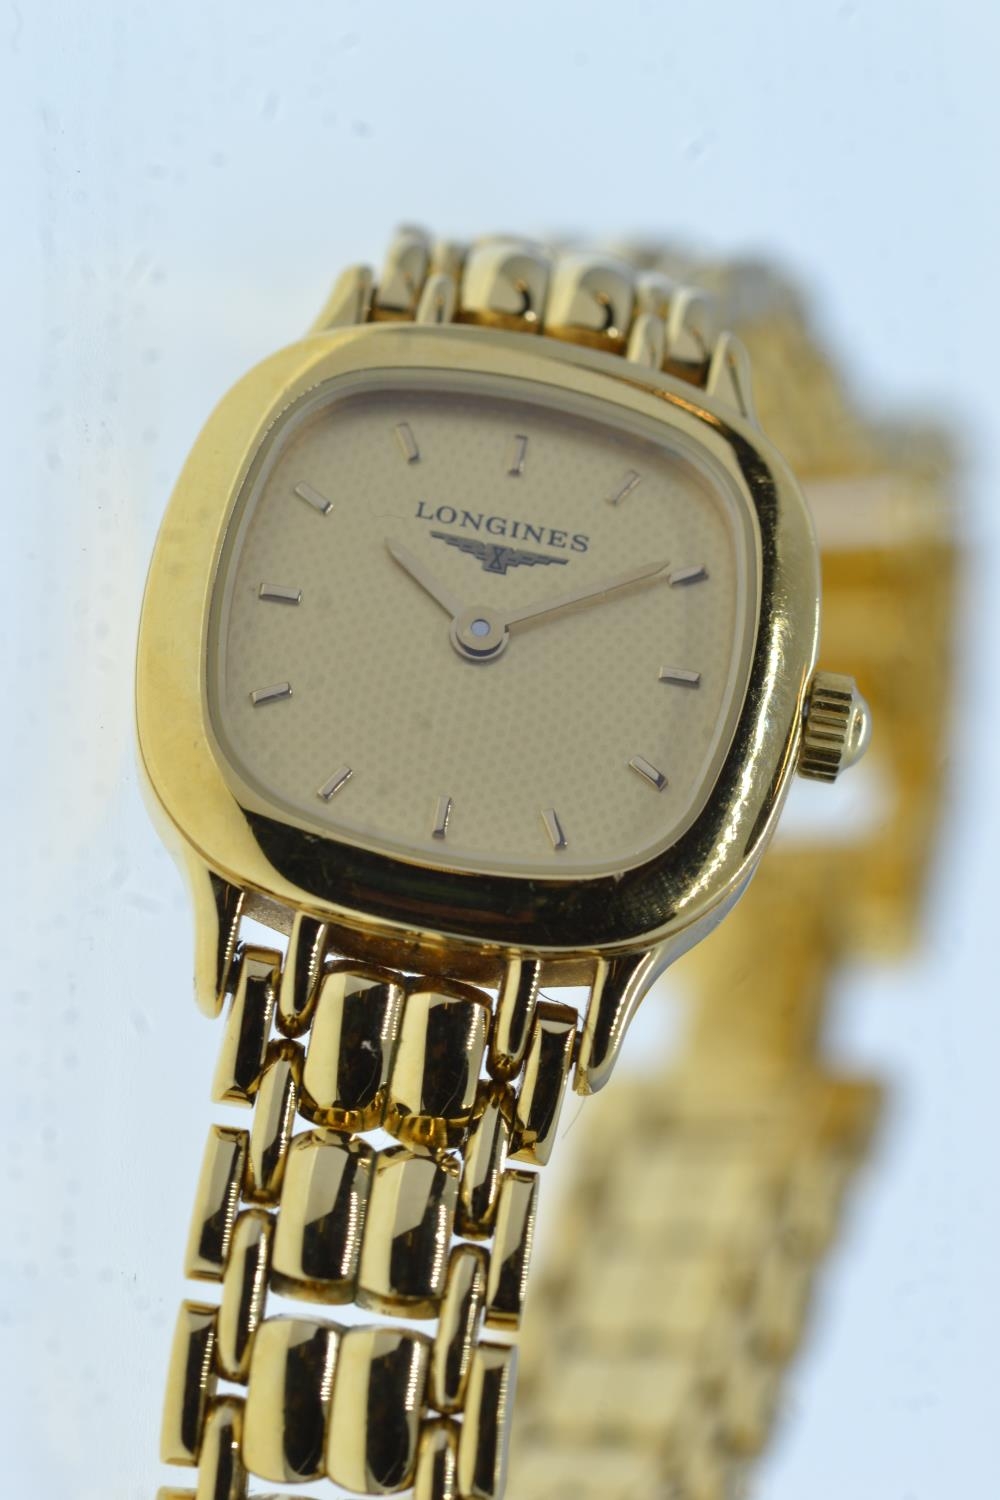 Longines ladies gold plated quartz wristwatch, case no. 25956858, ref. no. 12699-11, with papers & b